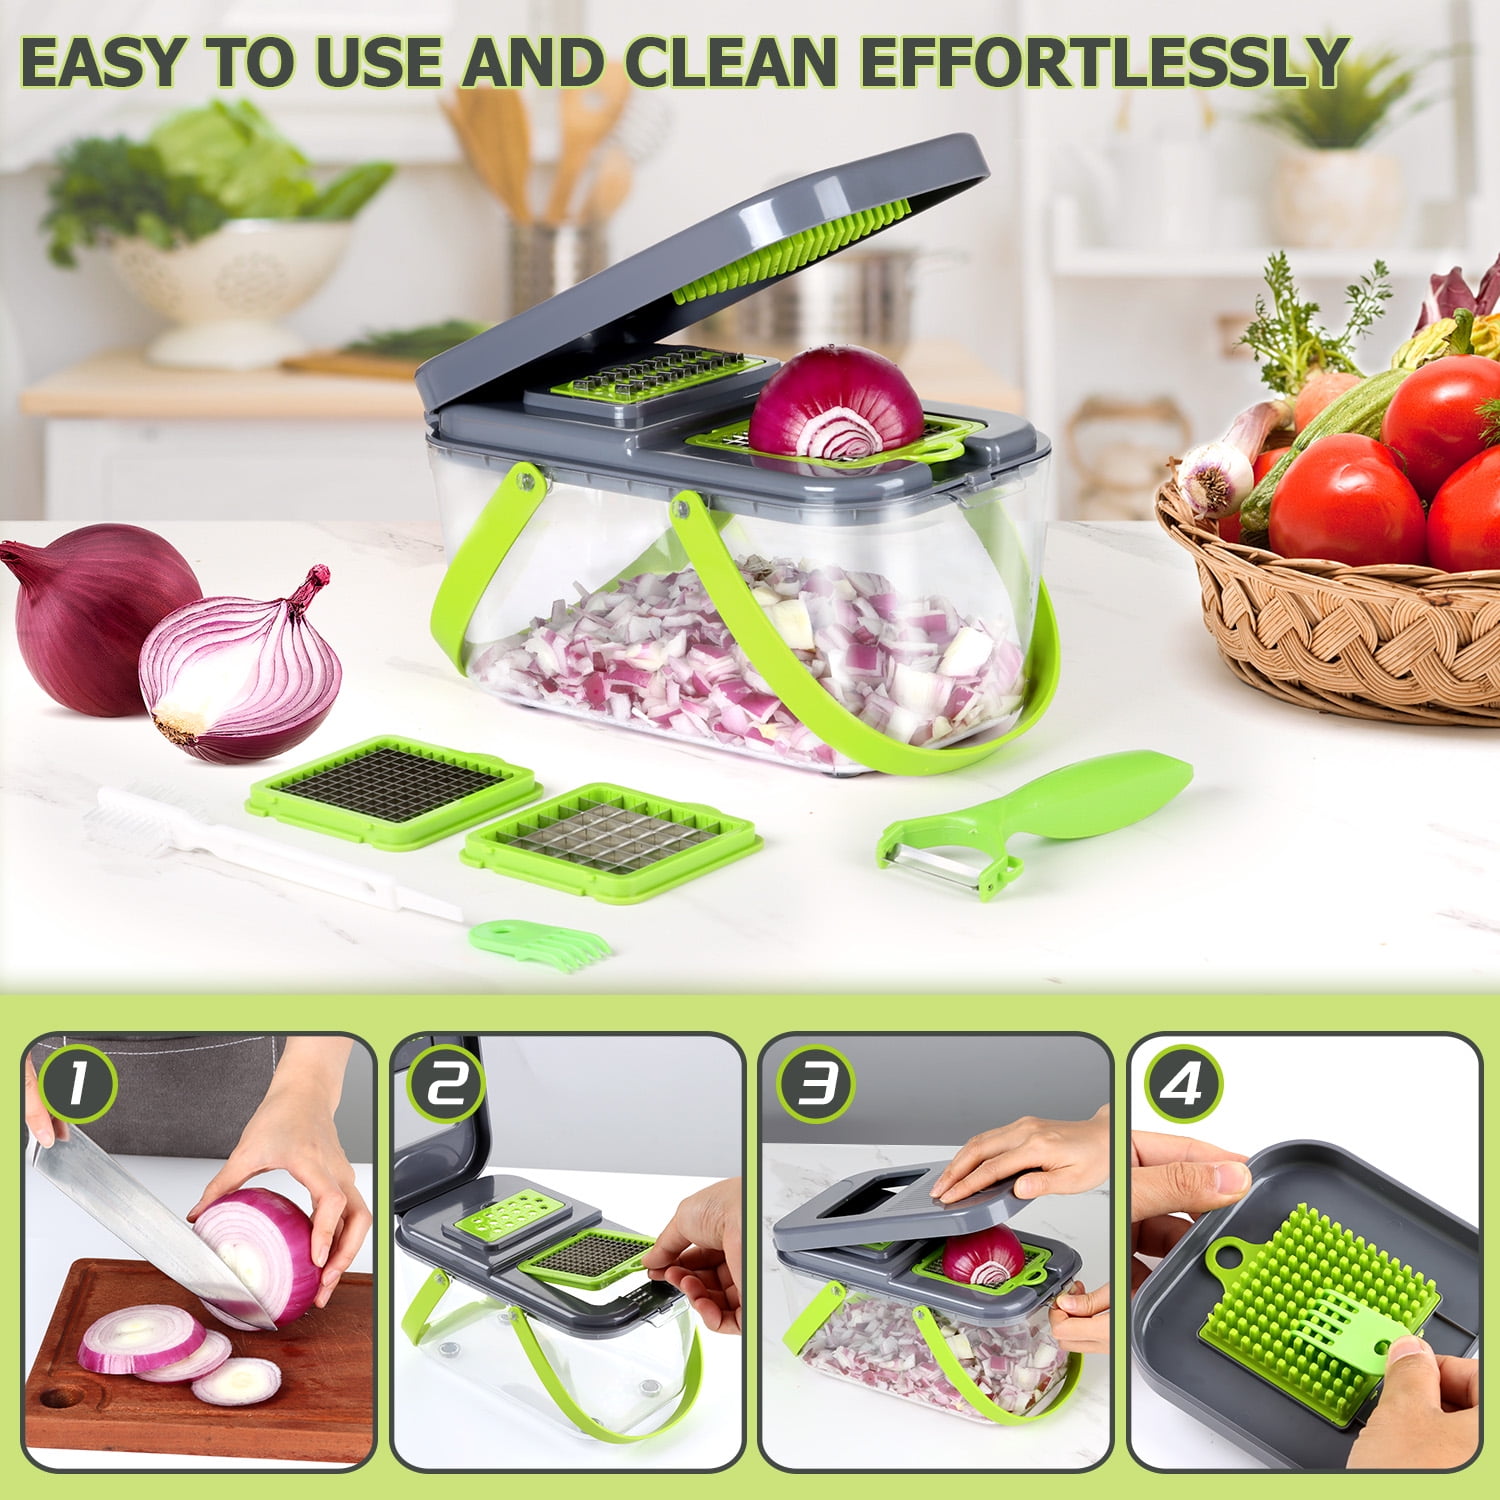 Check out my new favorite kitchen heller… the cup slicer! Save